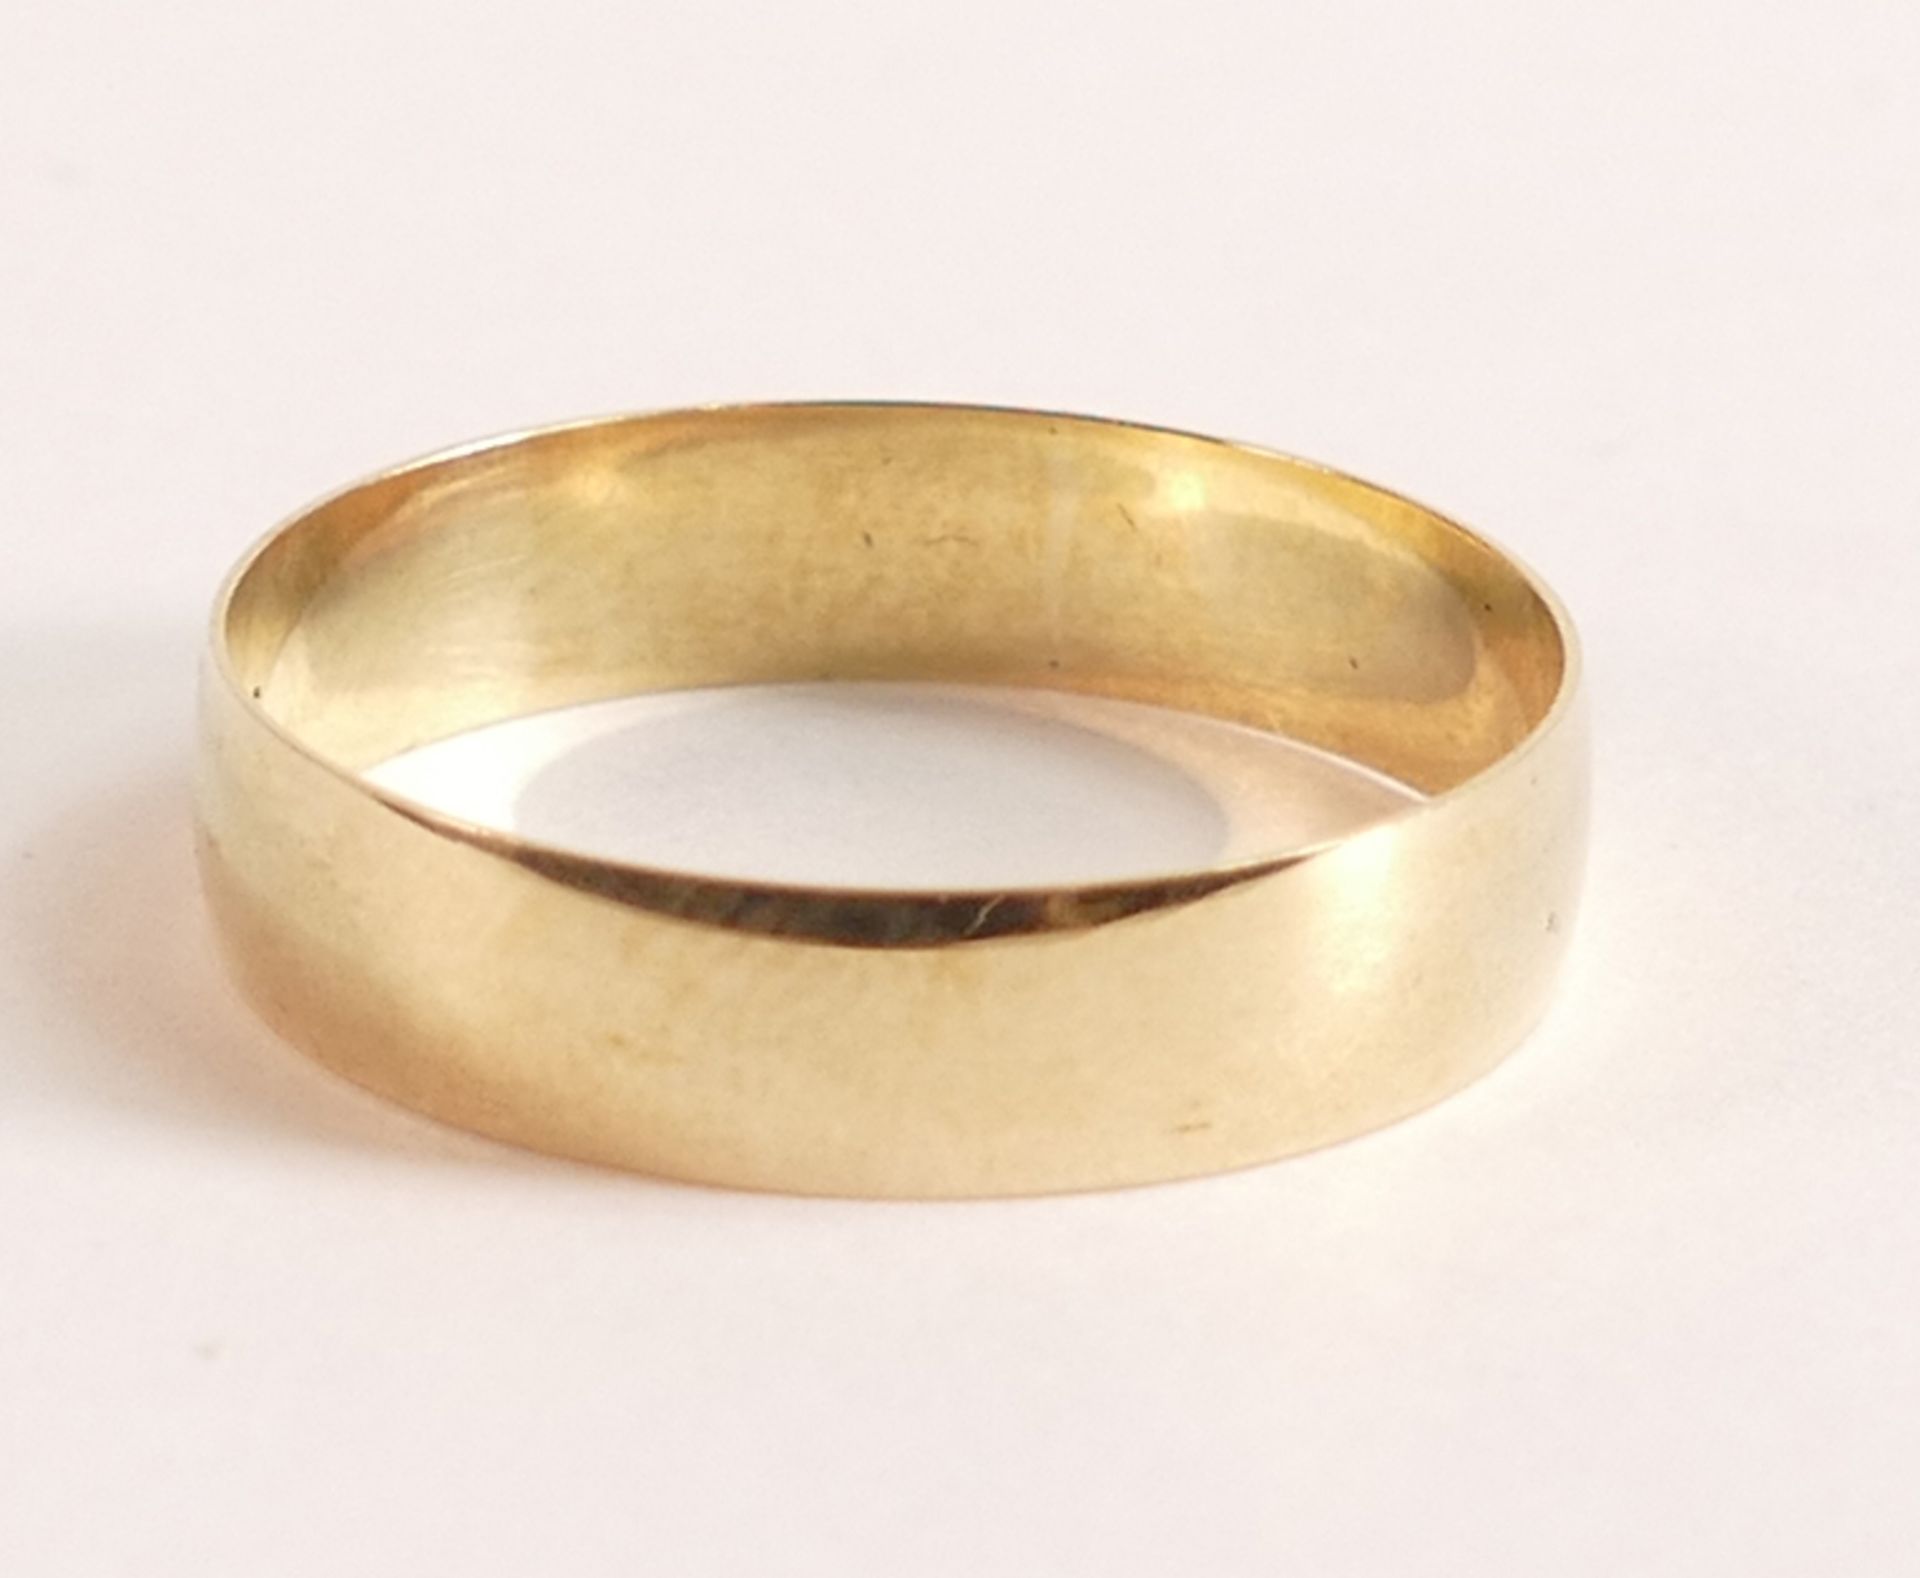 WARREN JAMES 9ct Yellow Gold Band Ring - This beautiful Yellow Gold Band reflects the very best of